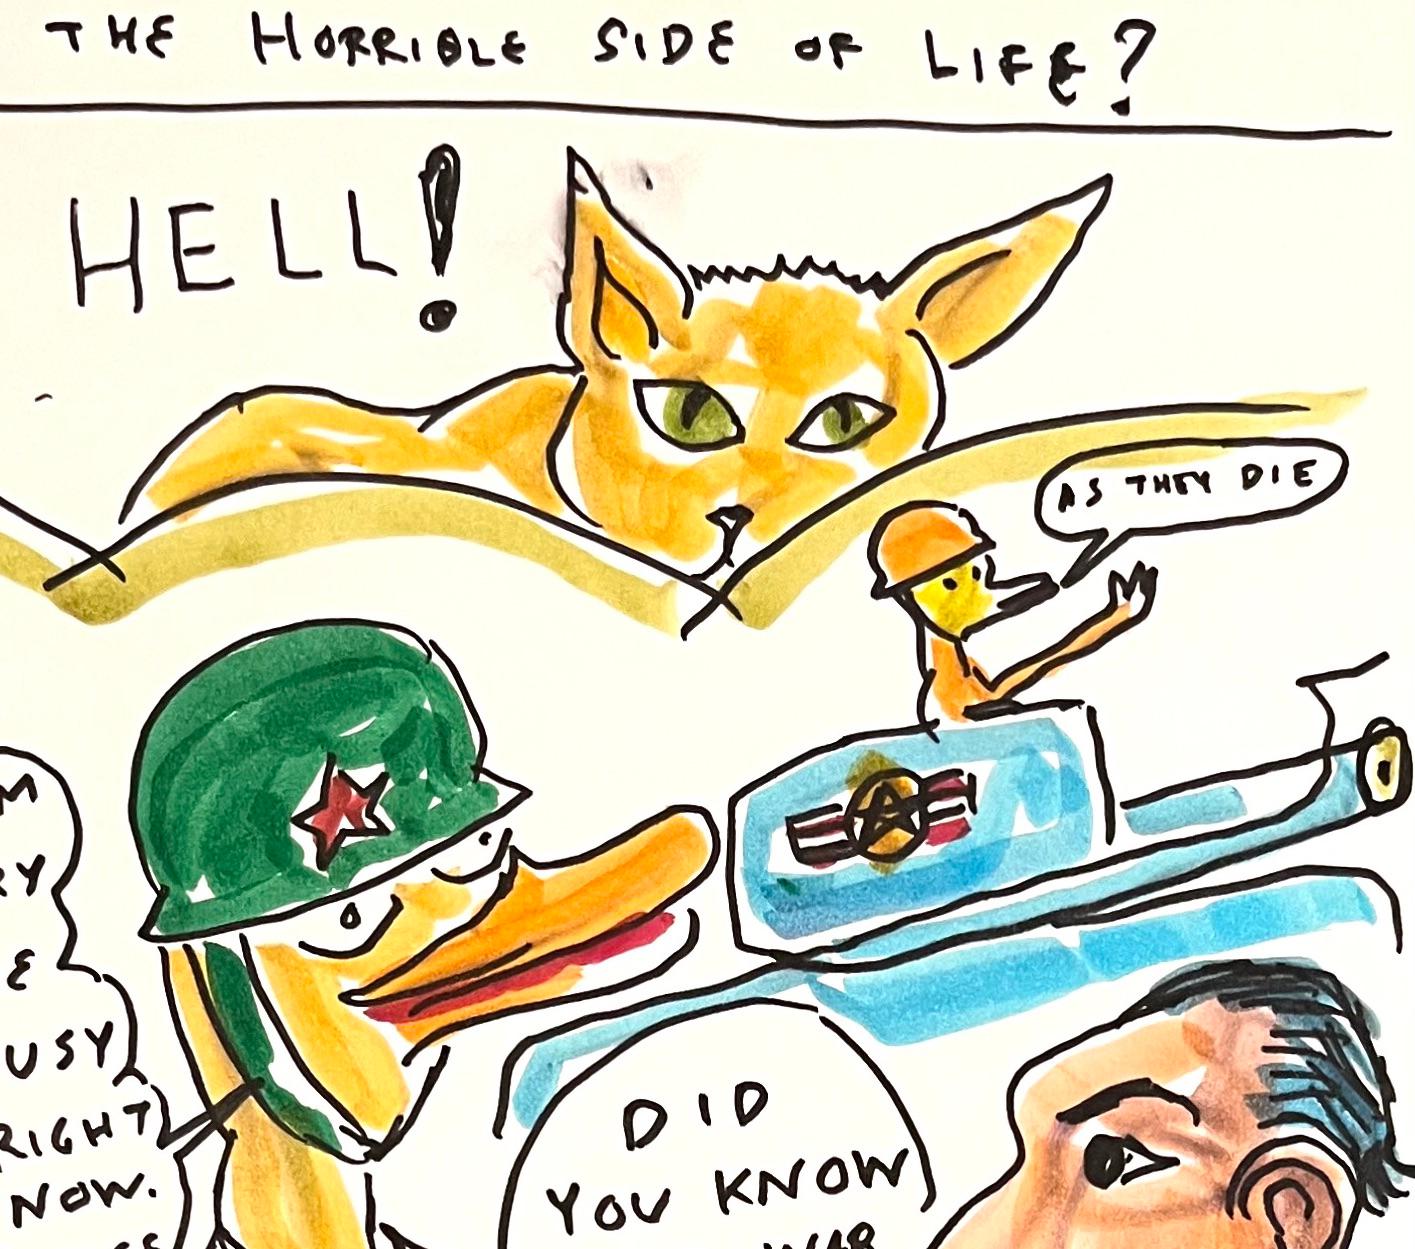 Have You Seen the Horrible Side of Life - Figure Ink Drawing, Duck Wars Series - Art by Daniel Johnston